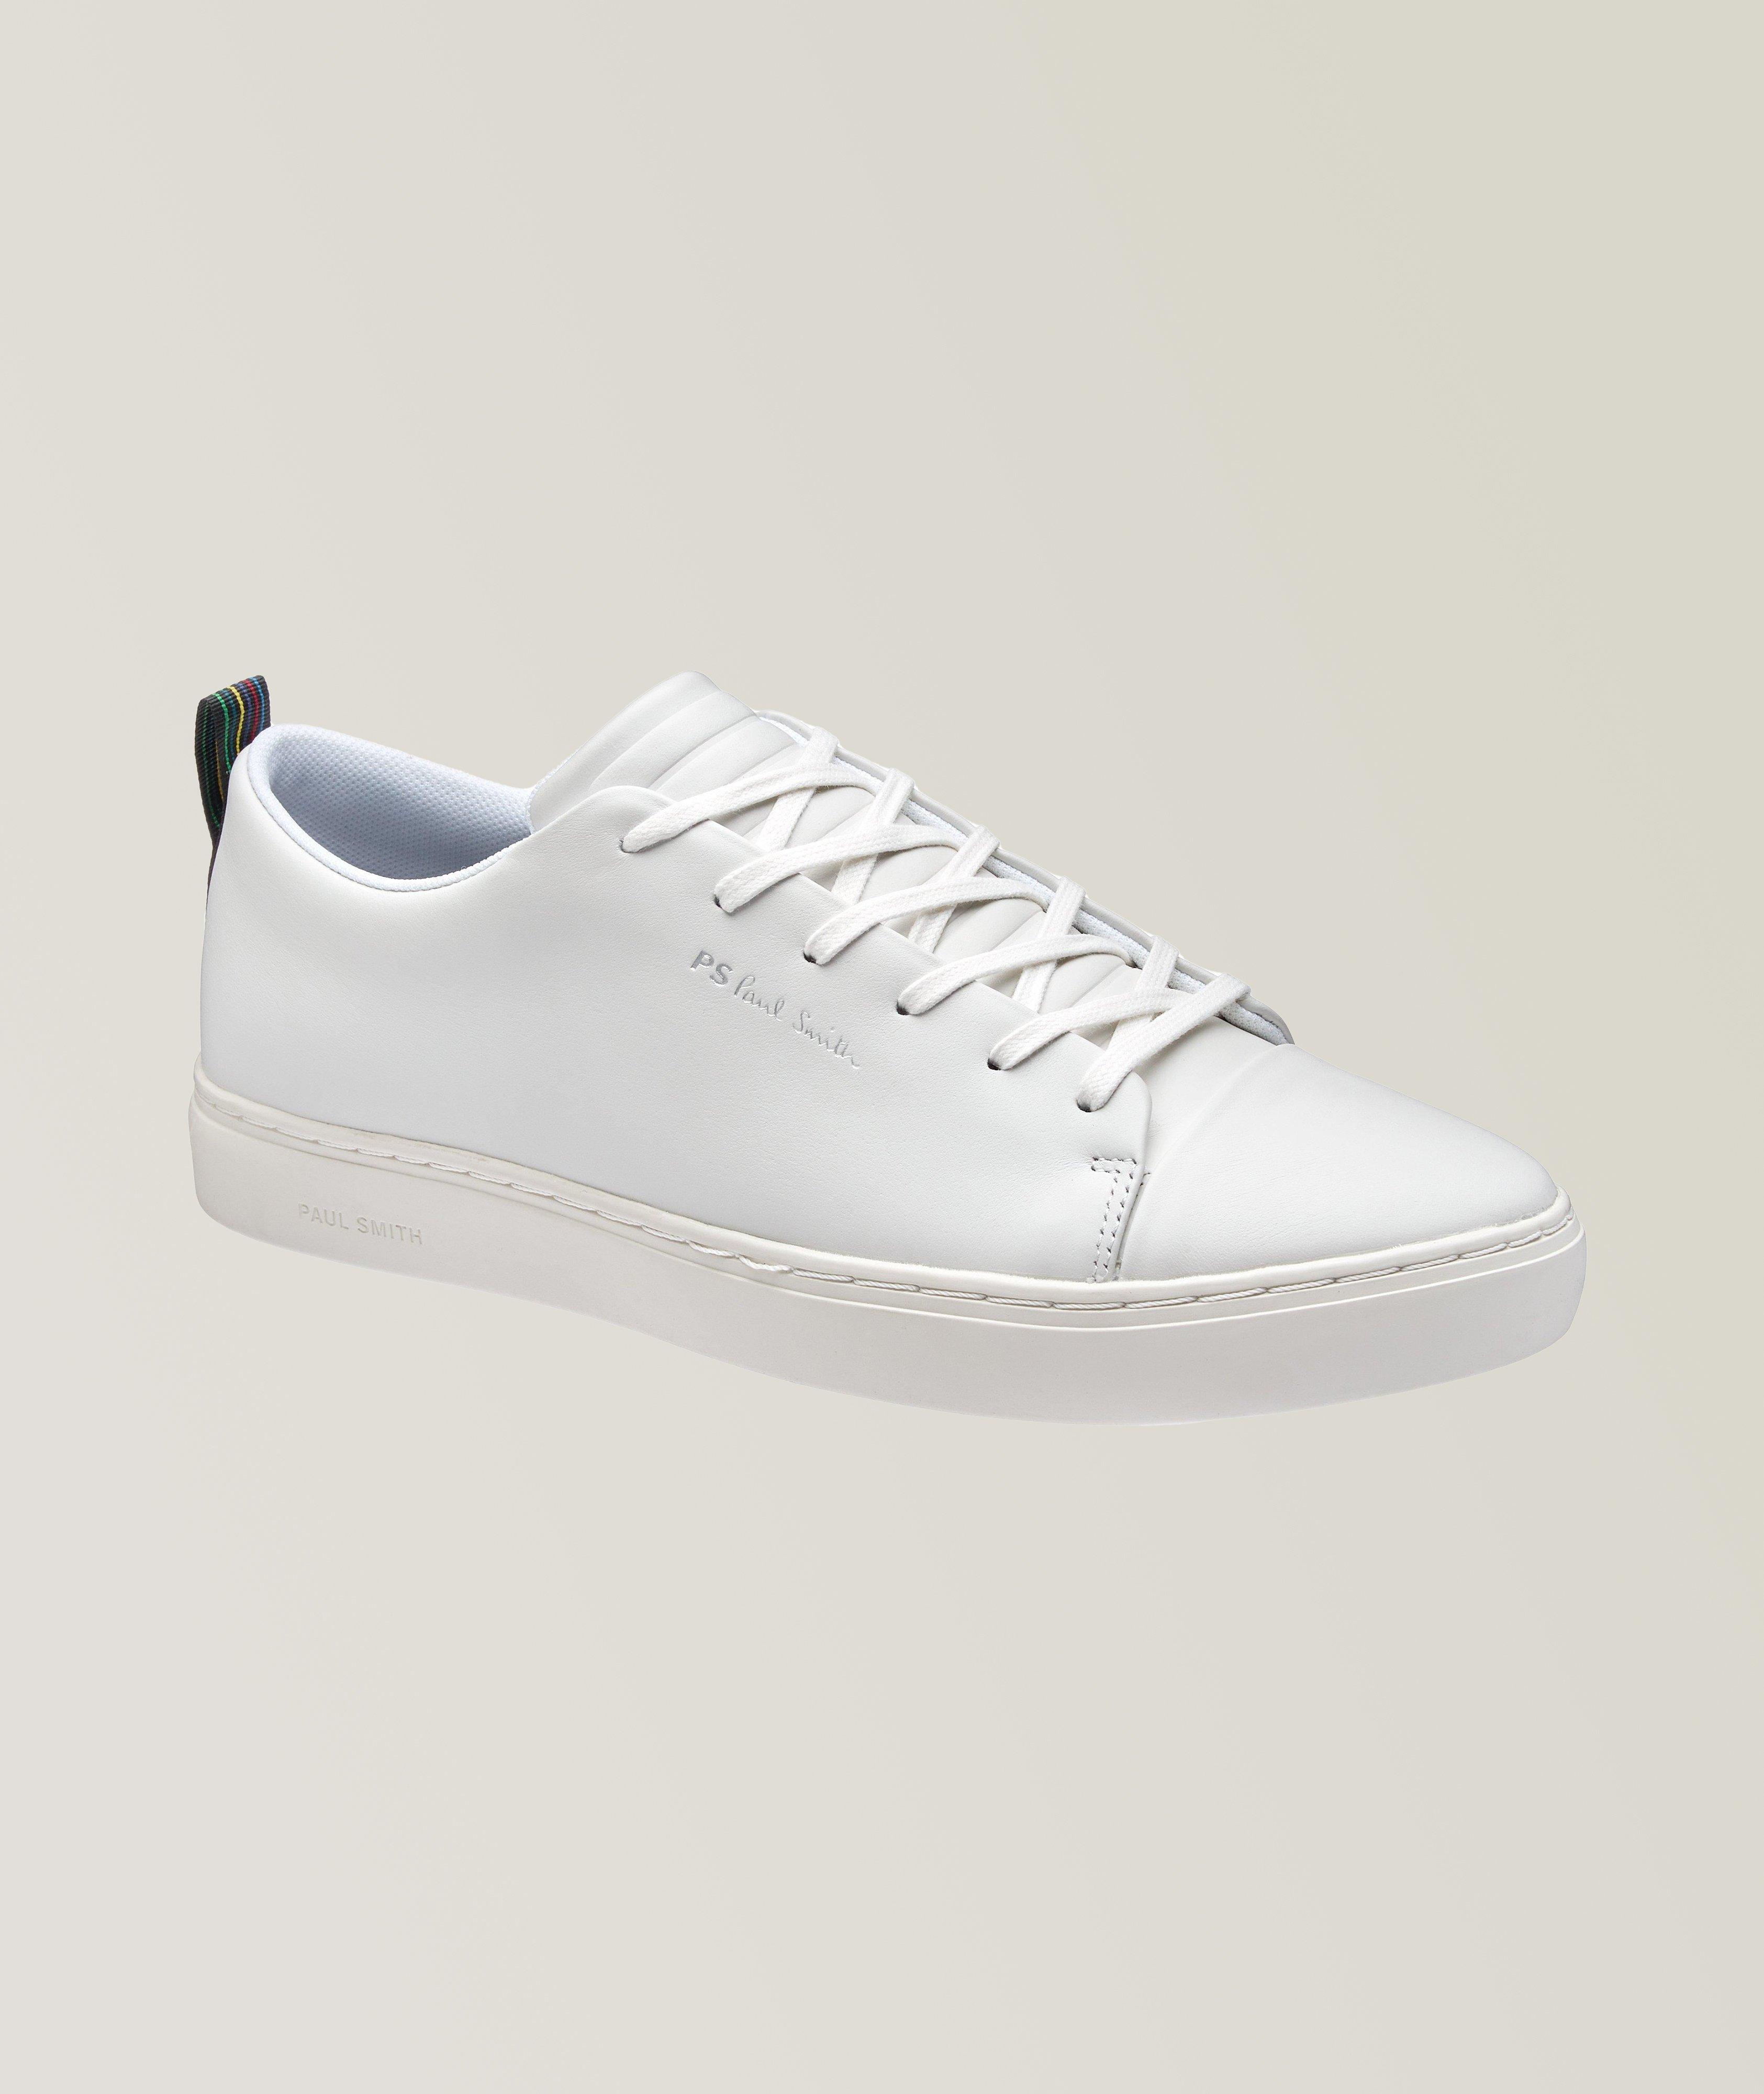 Lee Leather Sneakers image 0